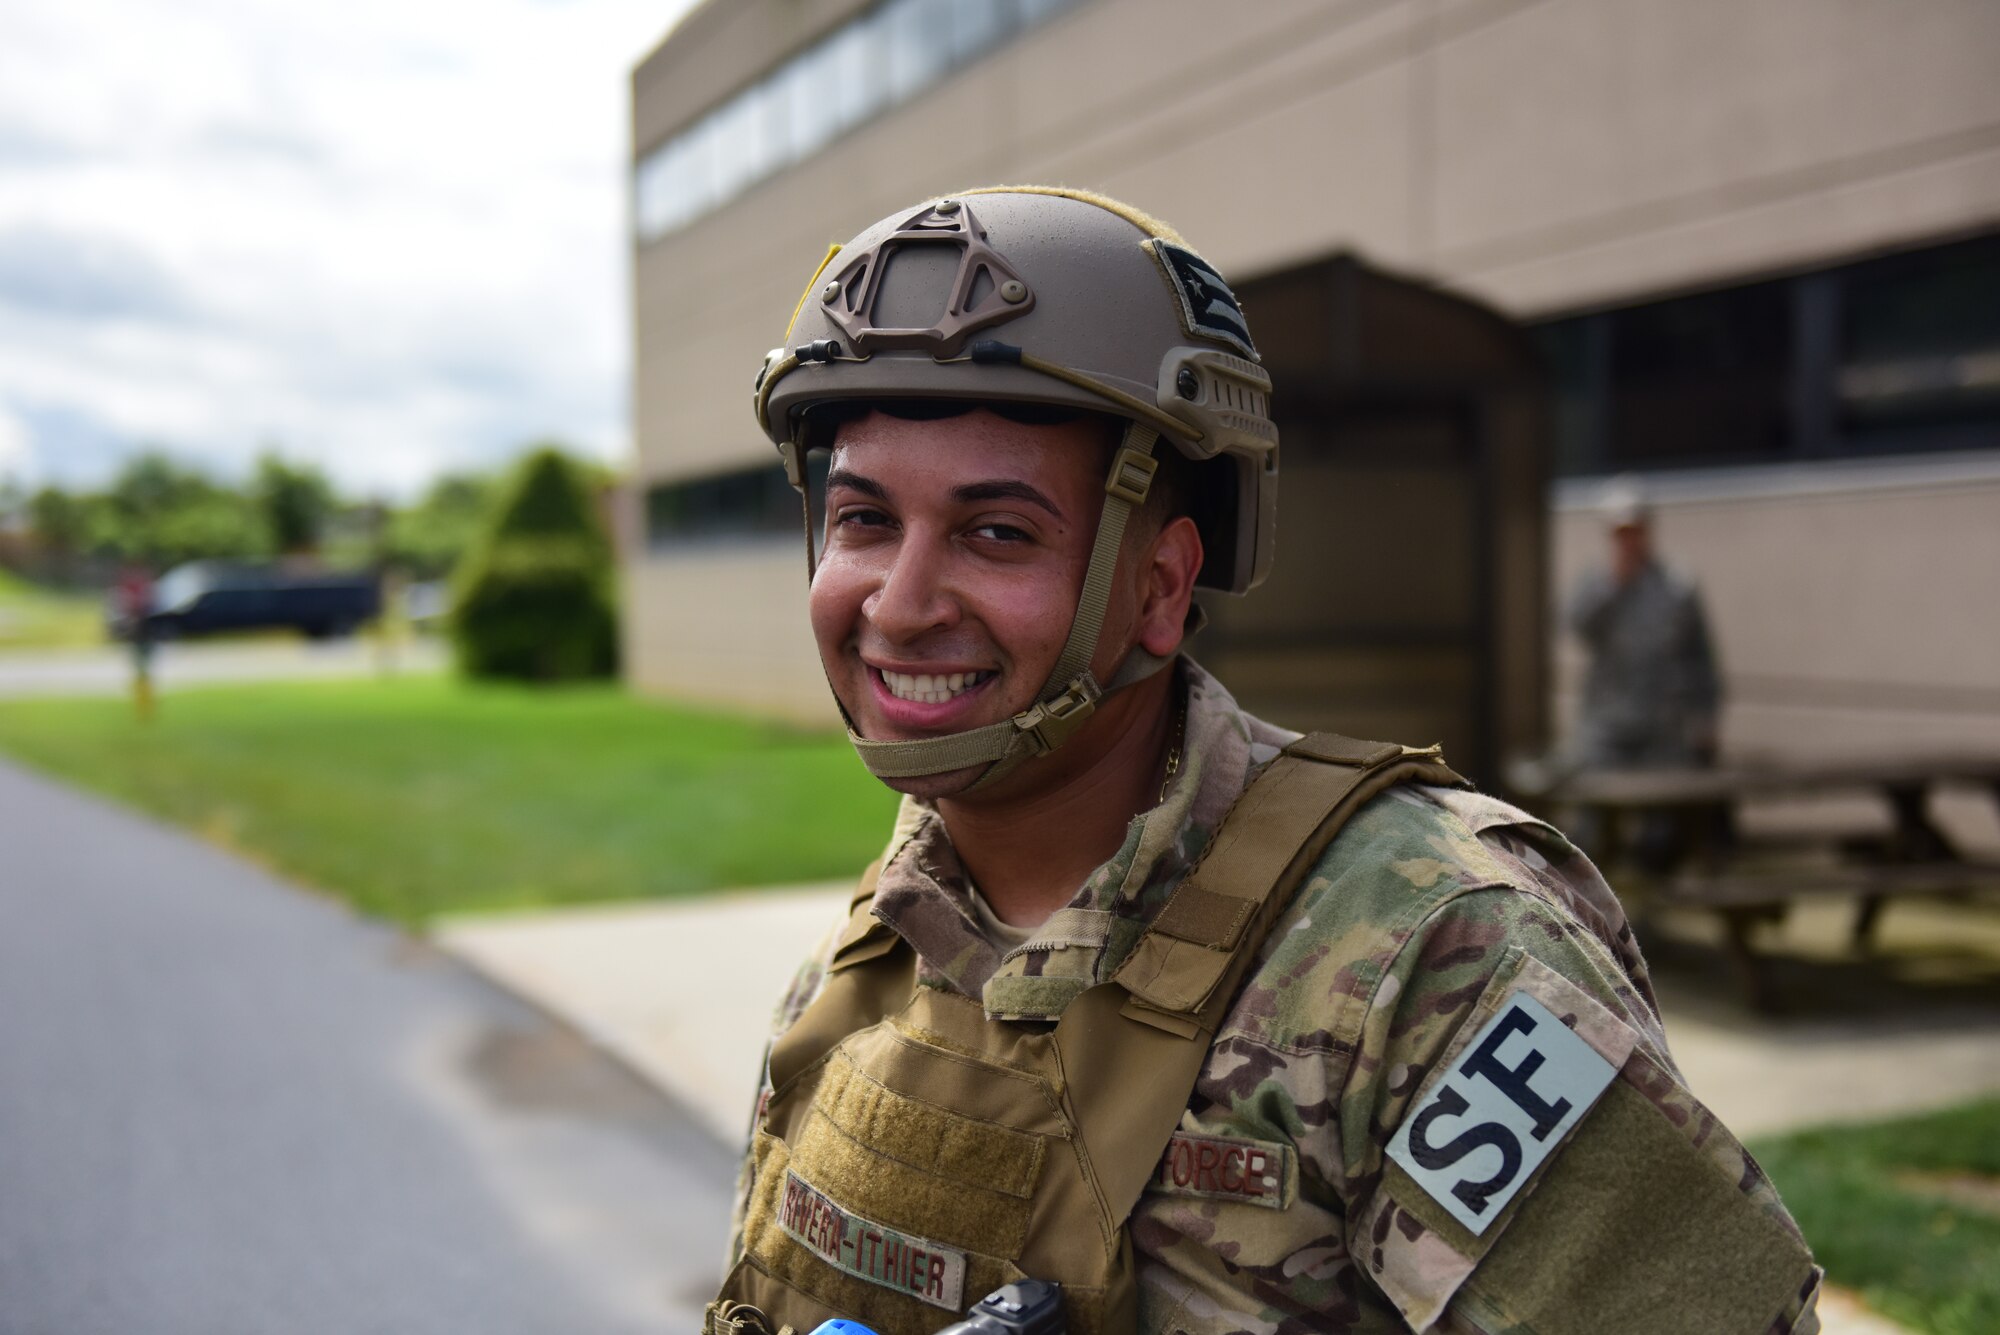 Staff Sgt. Kenneth Rivea-Ithier, a security forces specialists from the 193rd Special Operations Security Forces Squadron, Middletown, Pennsylvania, Pennsylvania Air National Guard, poses for a photo after participating in riot control countermeasures training July 22, 2018. The 193rd SOSFS Airmen participate in this two times a year as part of their required domestic operations training. (U.S. Air National Guard photo by Senior Airman Julia Sorber/Released)